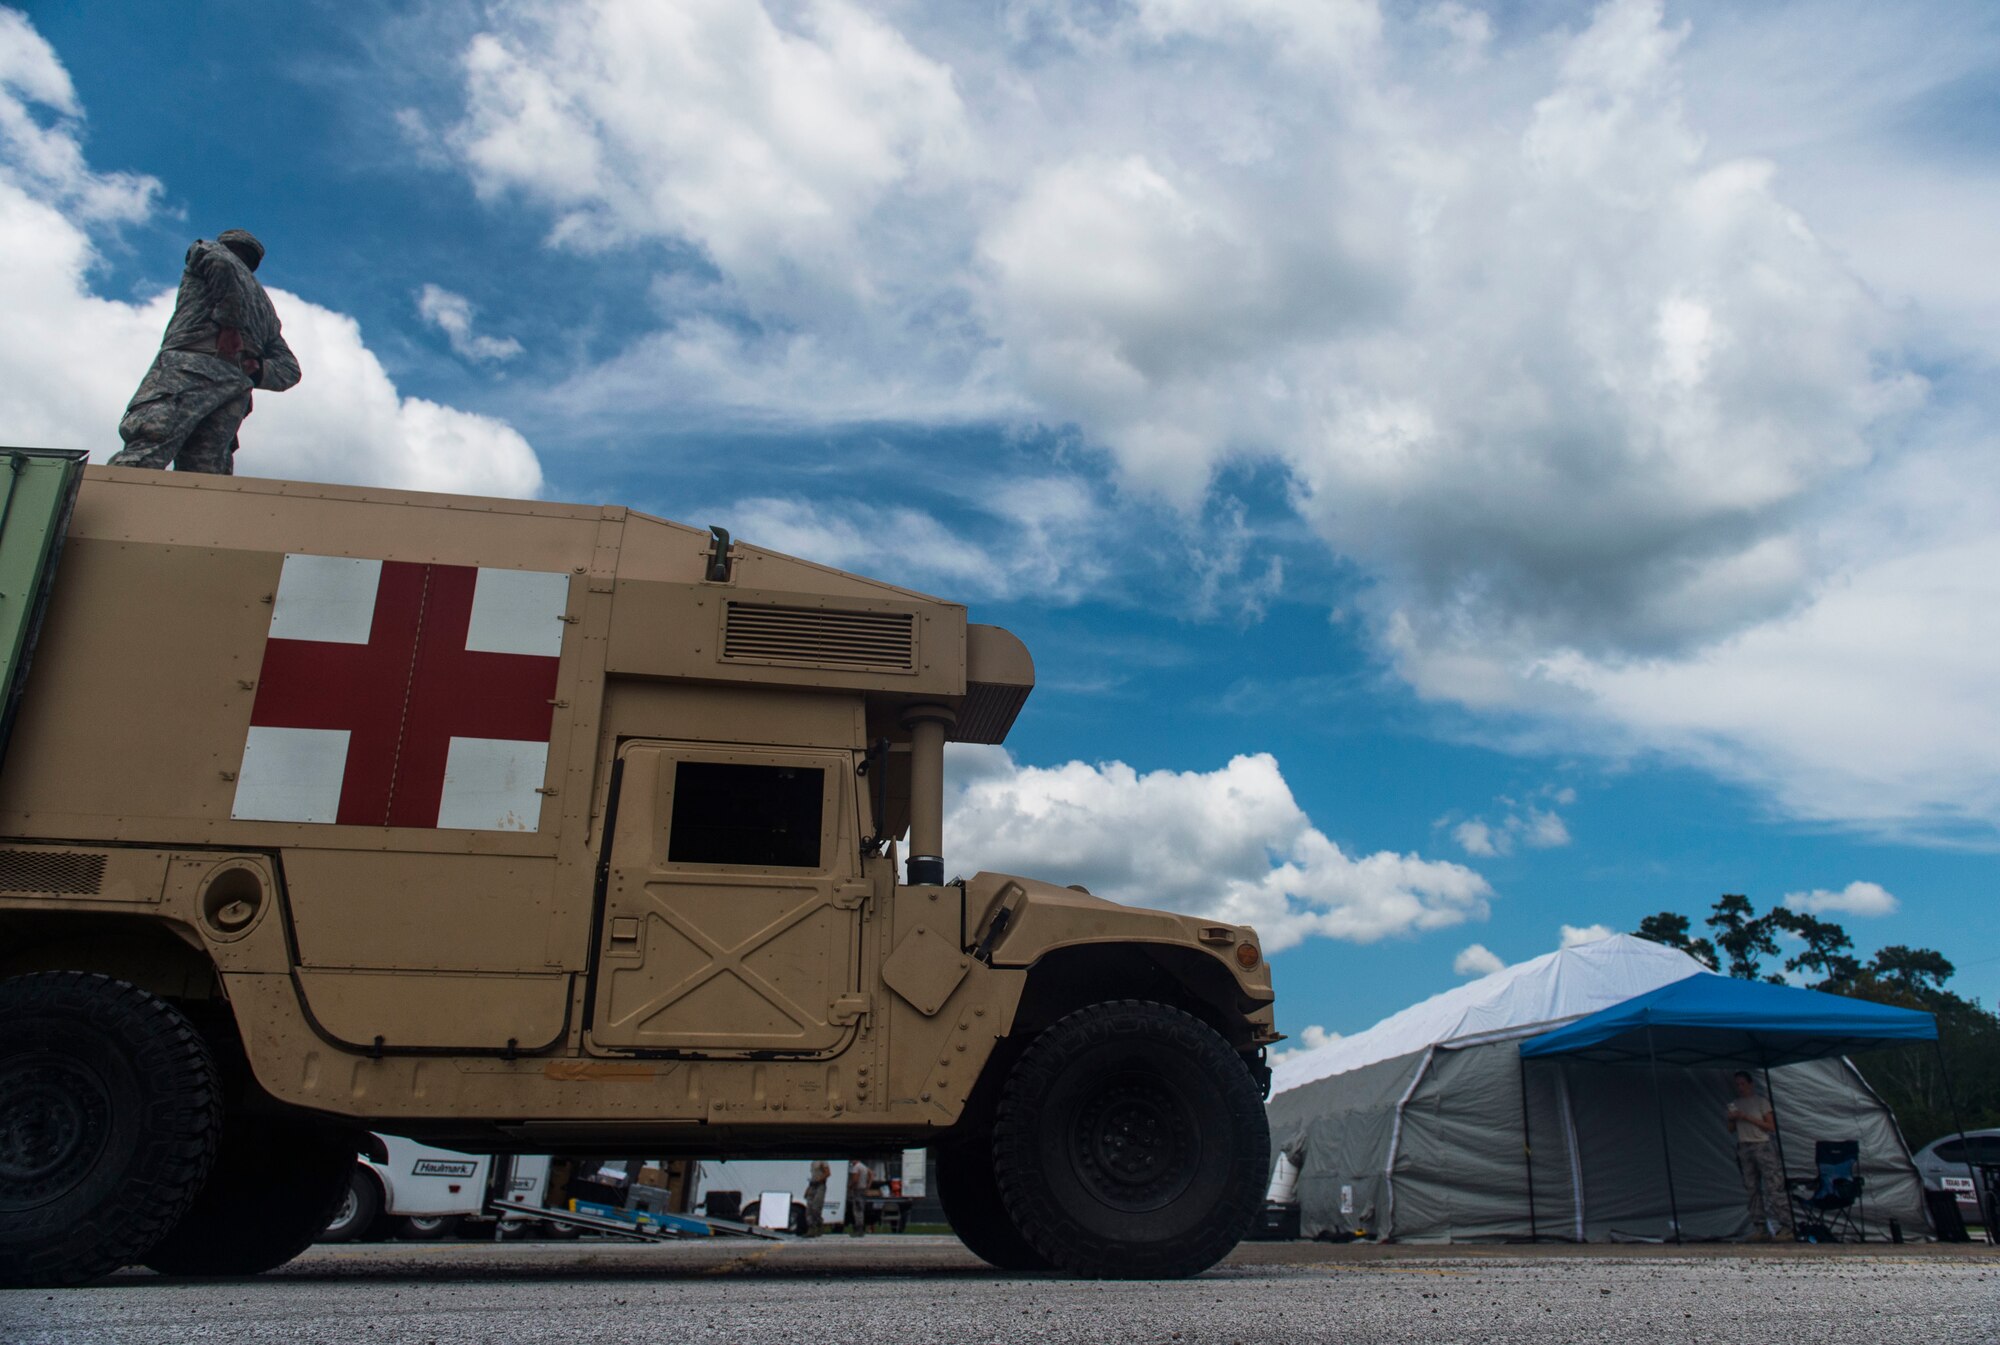 Nebraska Air National Guard Airman from the 155th Medical Group, Lincoln Air National Guard Base, Nebraska, set up a field hospital in Vidor, Texas, to assistant local residents with medical care after Hurricane Harvey, Sept. 5, 2017. The field hospital, set up in the parking lot of Vidor High school, allowed residents easy access to medical care in areas heavily affected by Hurricane Harvey. (U.S. Air Force photo by Airman 1st Class Nicholas Dutton)